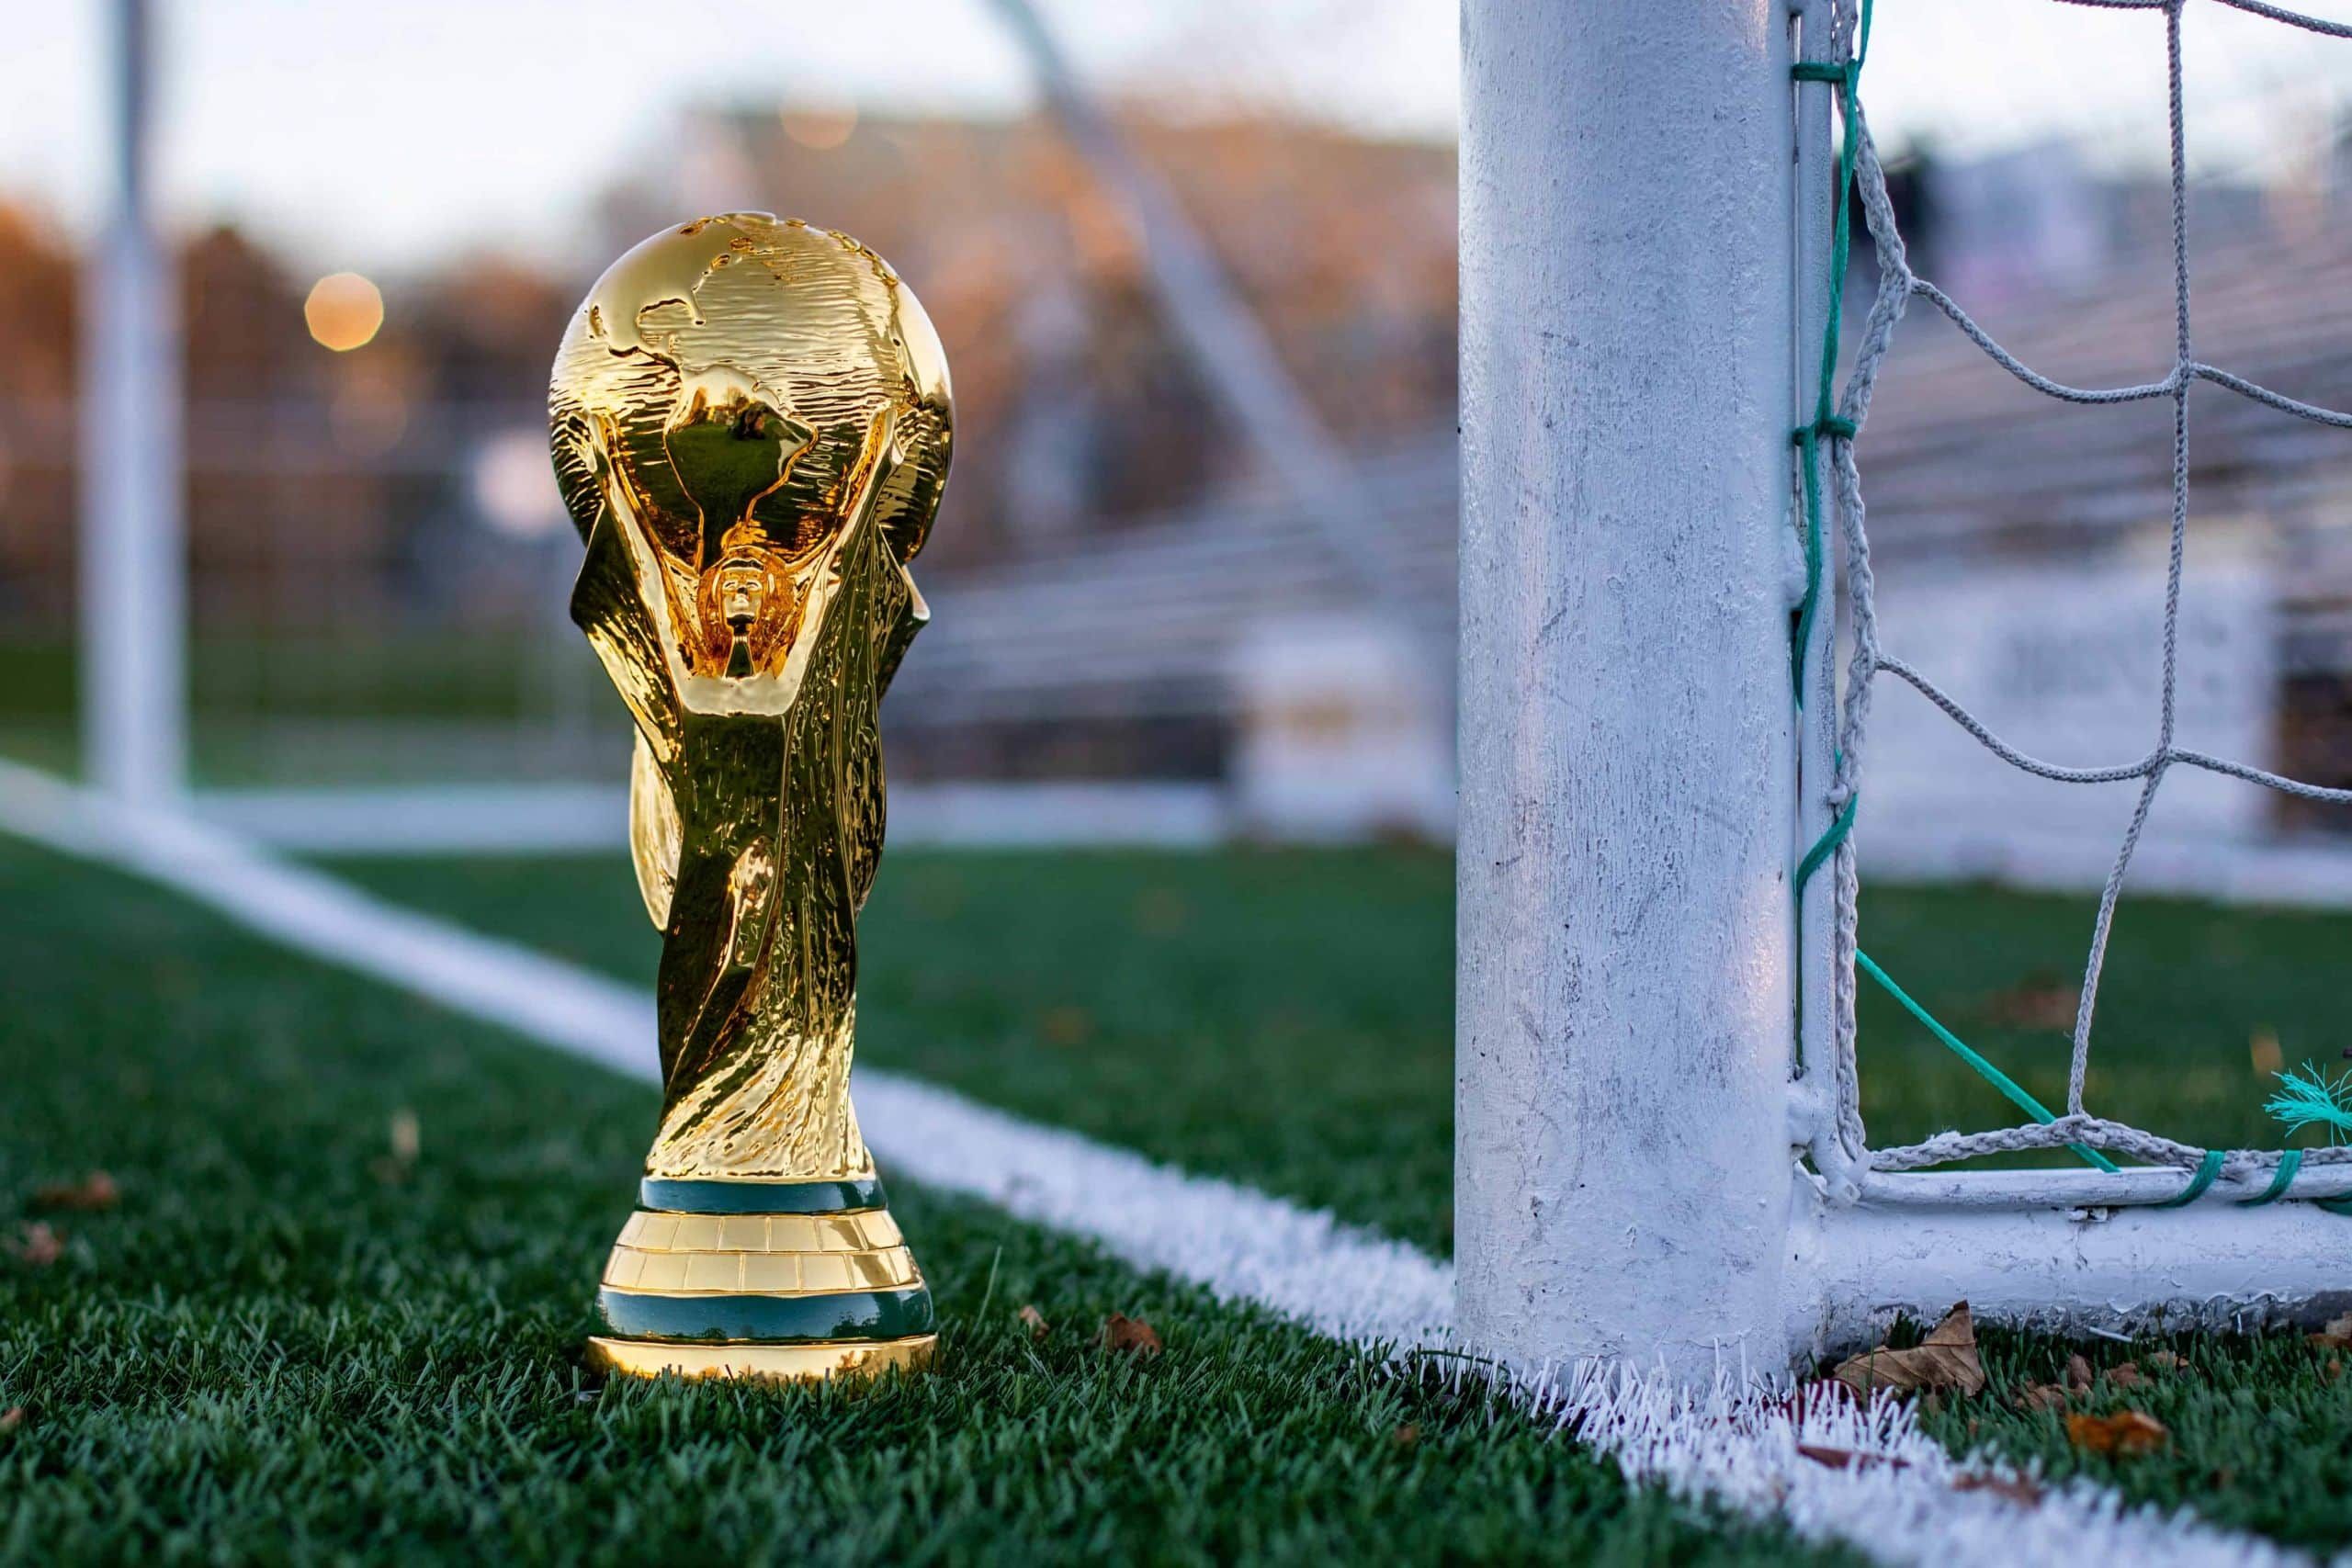 10 of 16 participants in the 1/8 finals of 2022 World Cup in Qatar have been determined